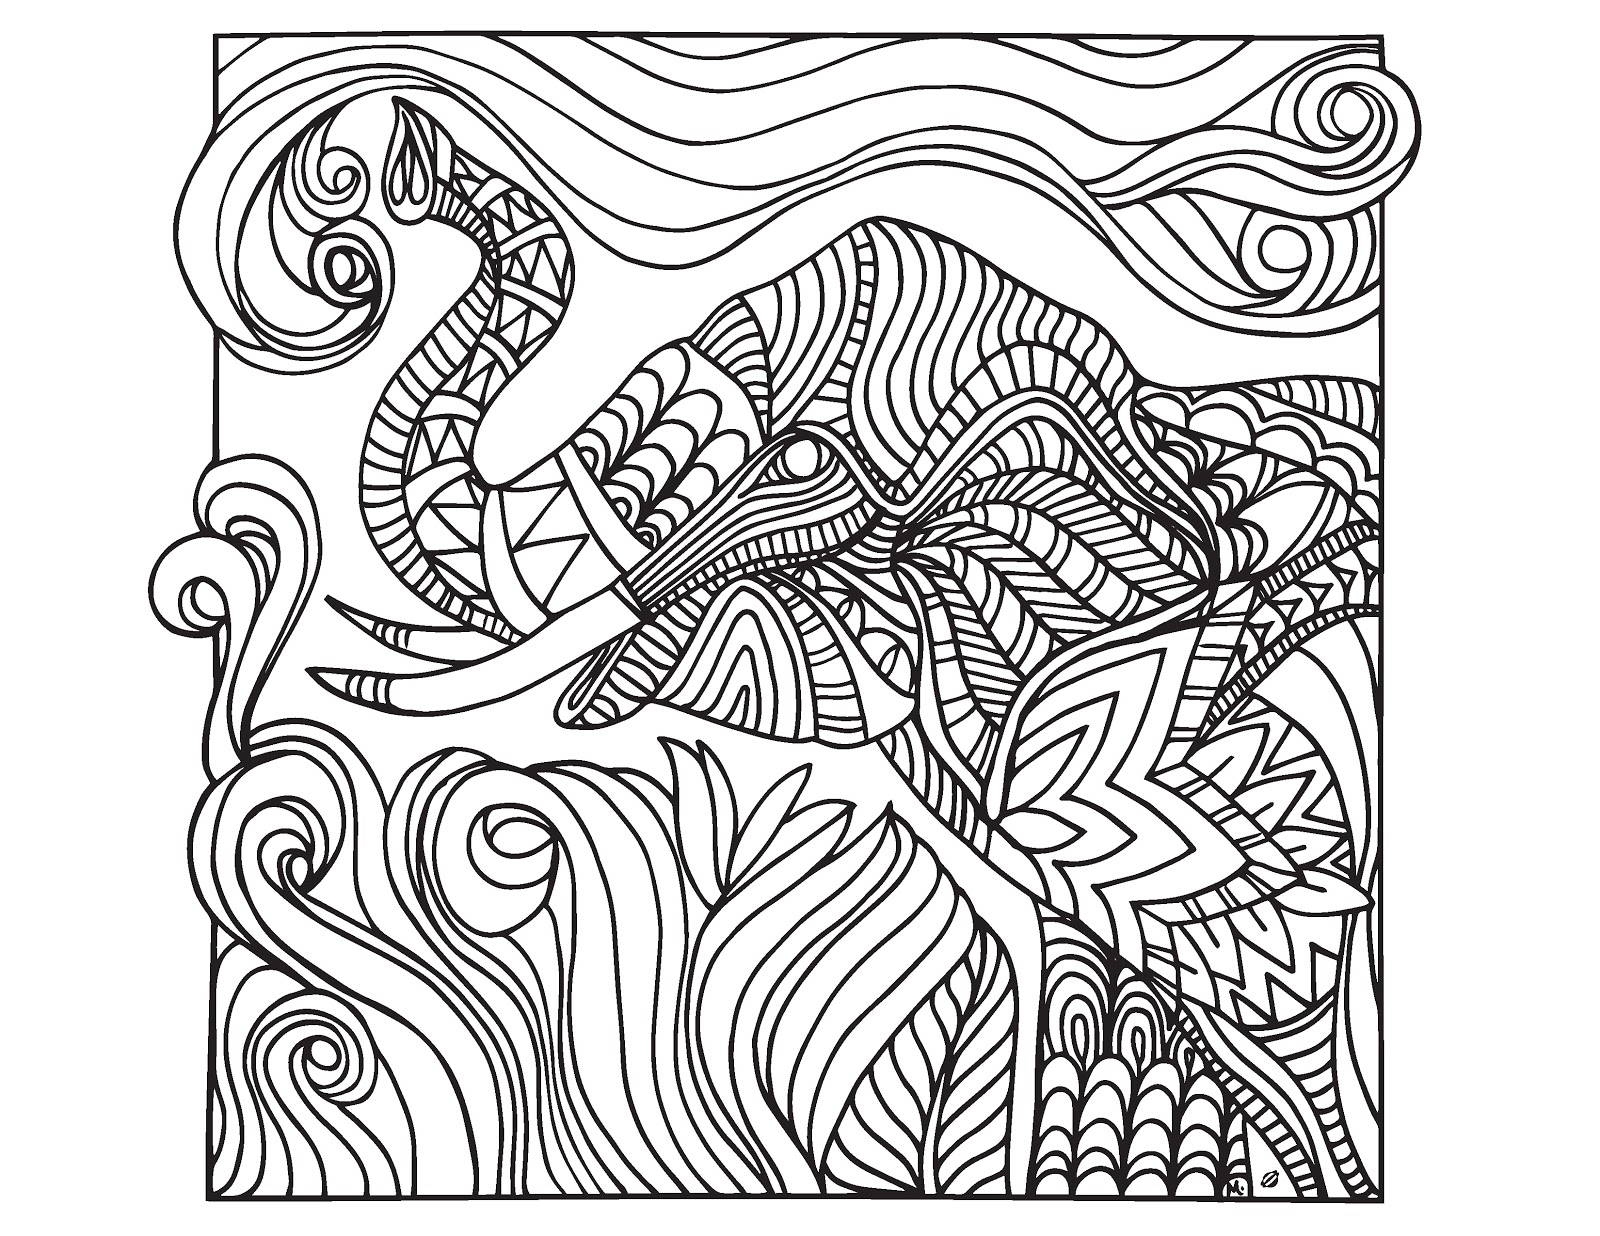 Grown up coloring pages to download and print for free